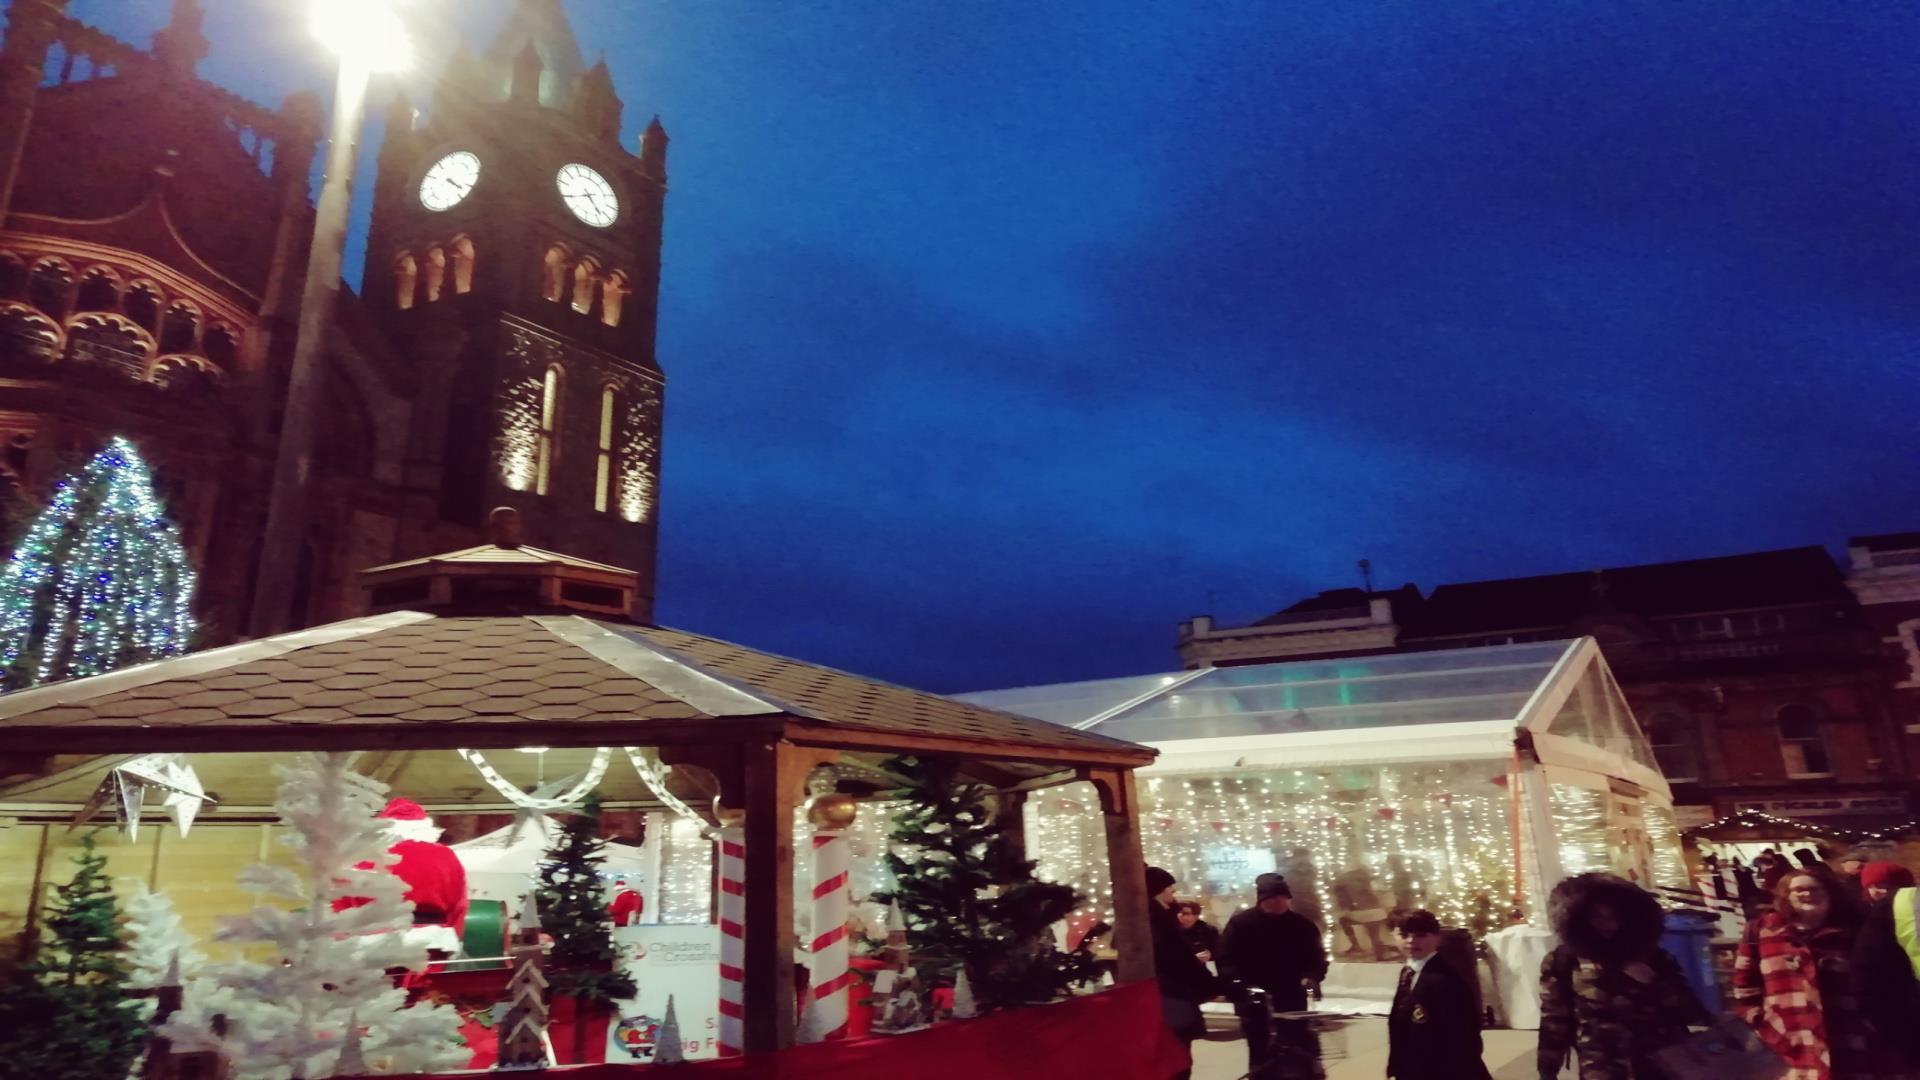 image of the Walled City Markets at Christmas at night. Christmas stalls with Guidhall and Guildhall clock in the background clo